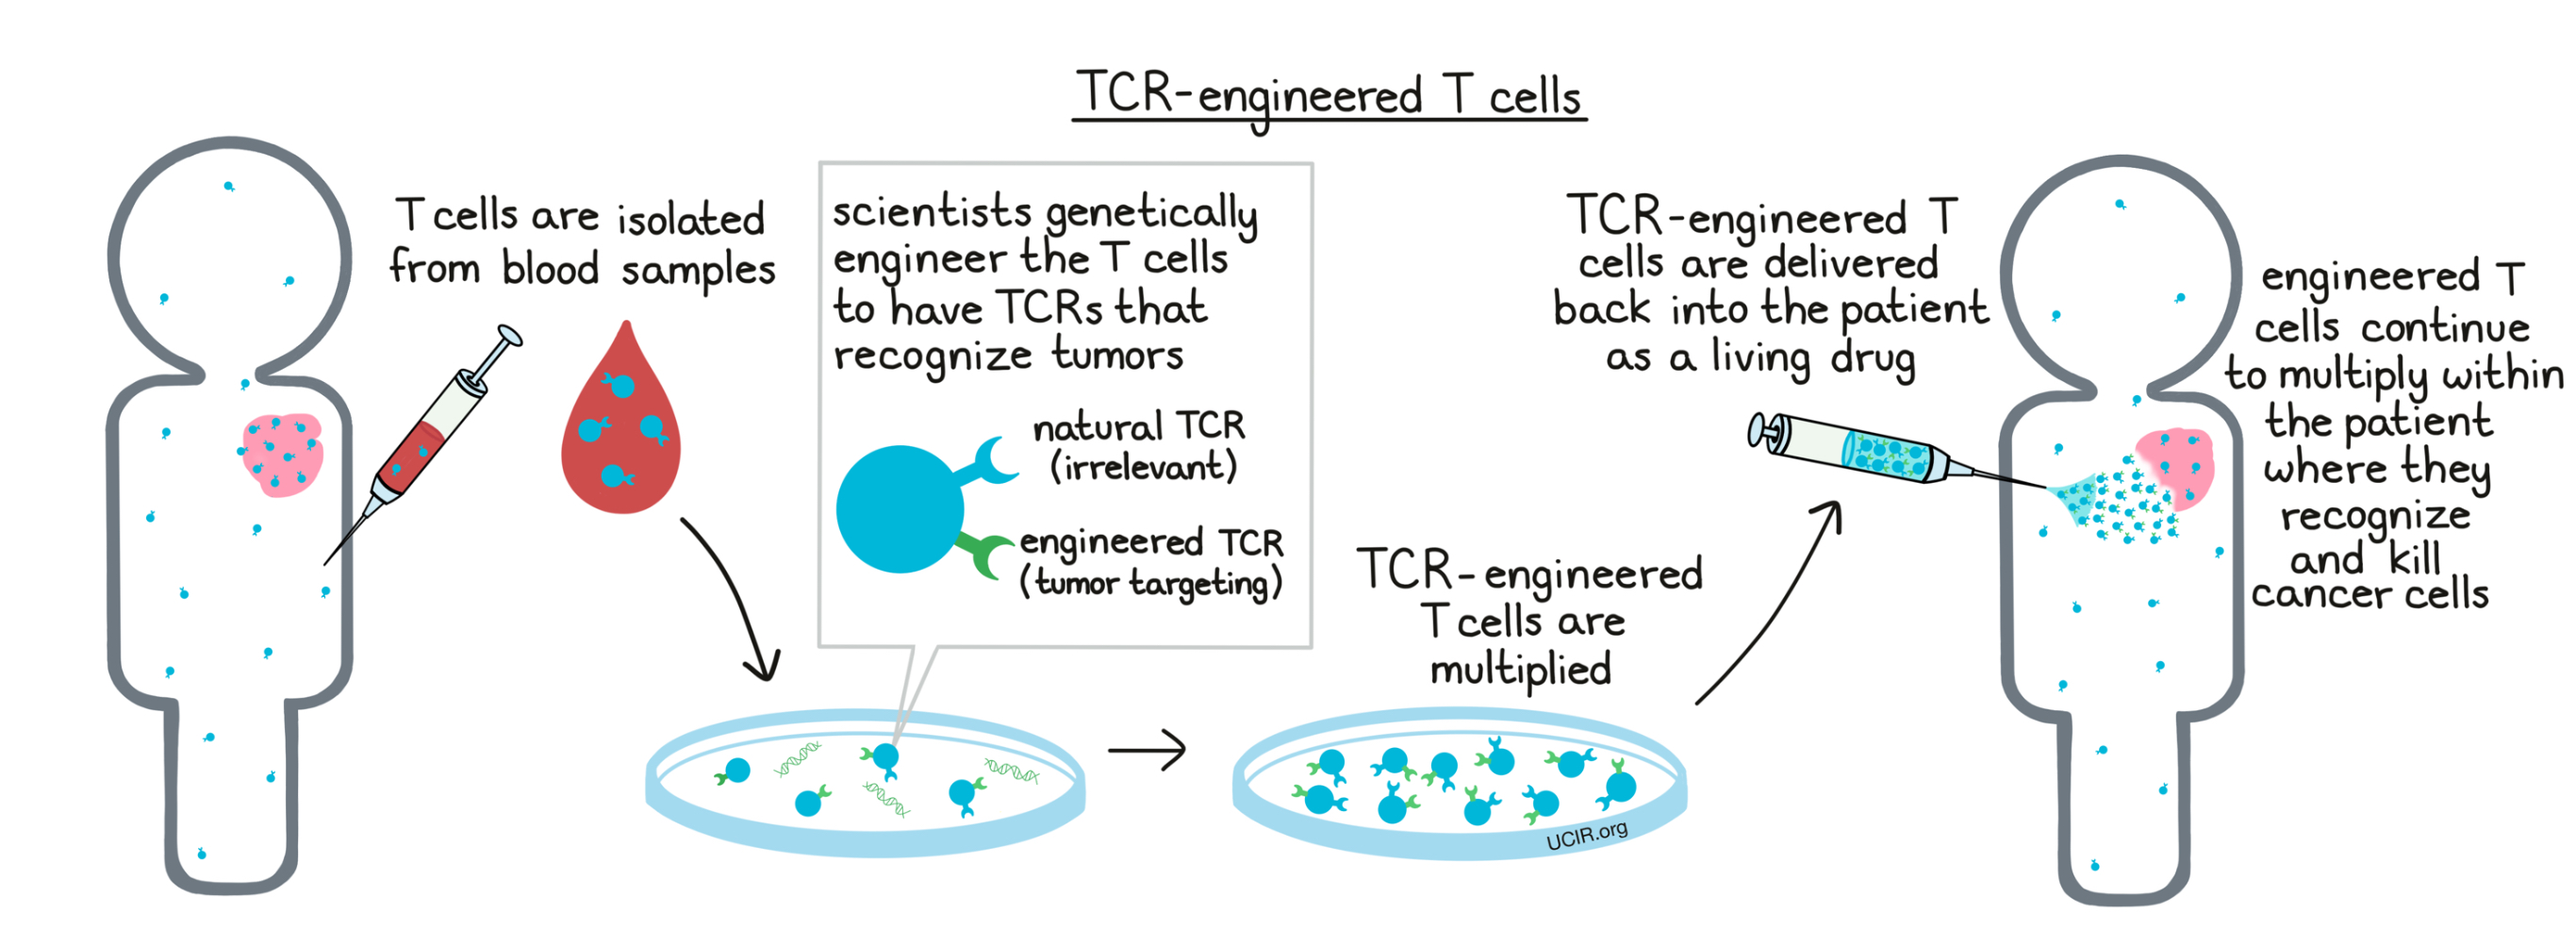 TCR-engineered T cells